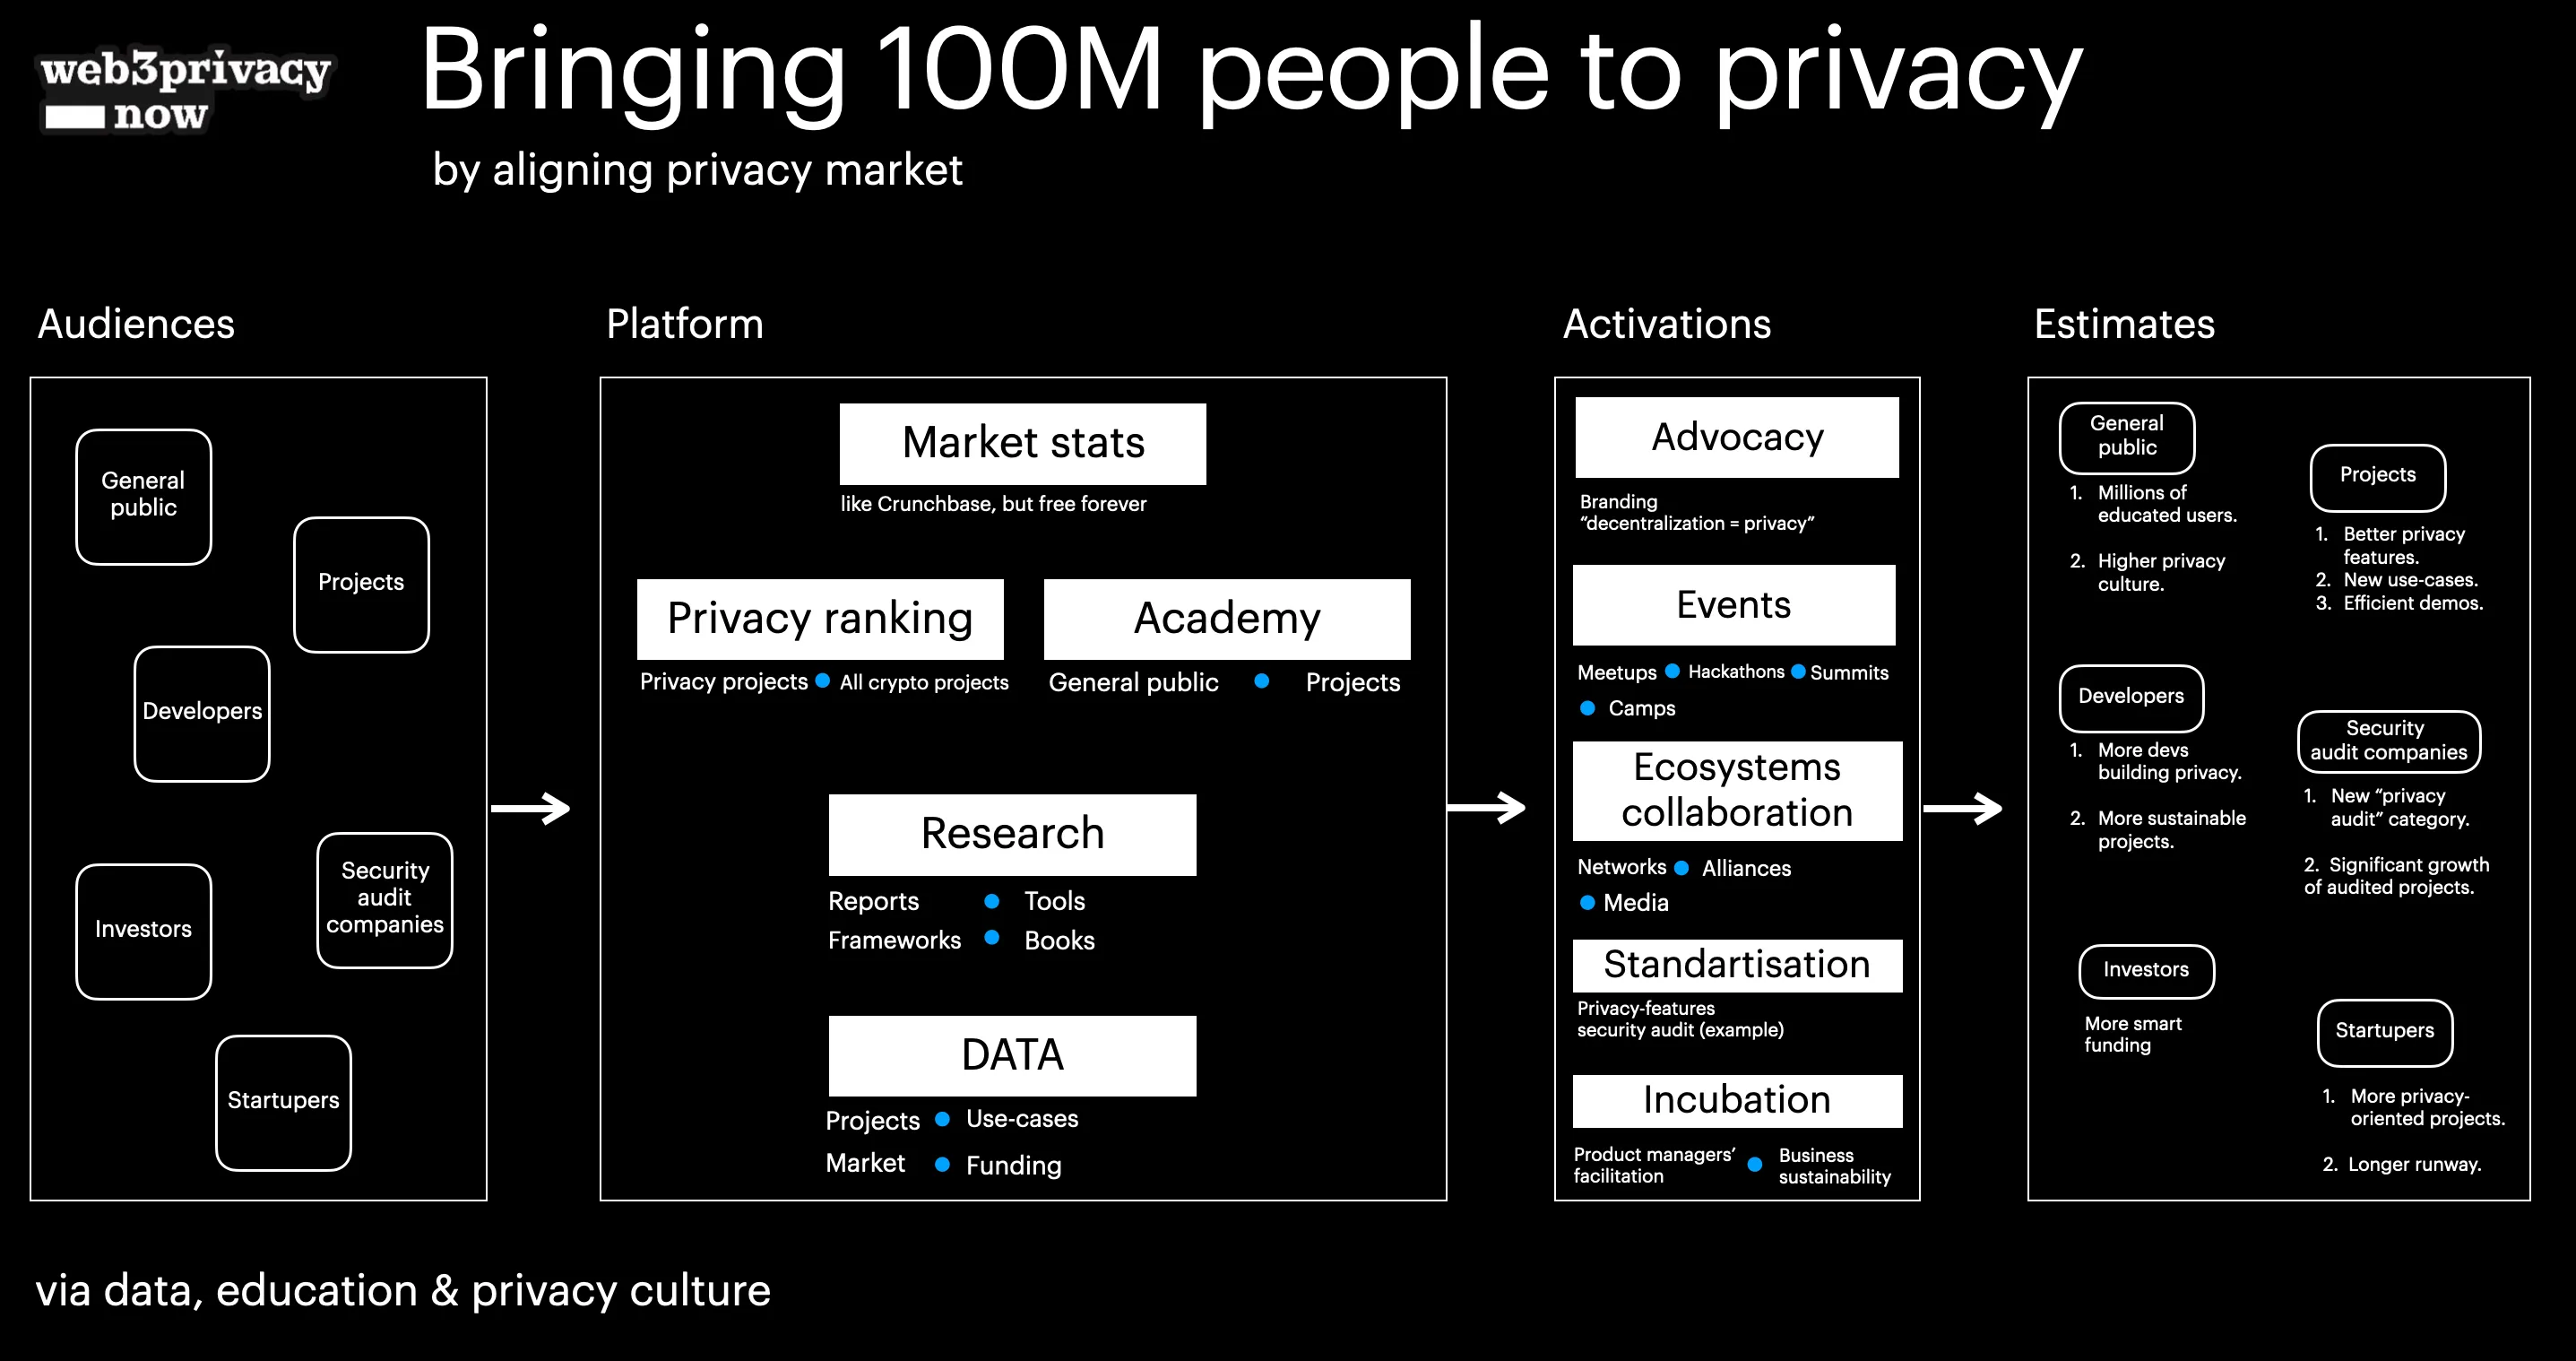 Bringing 100M users to privacy market